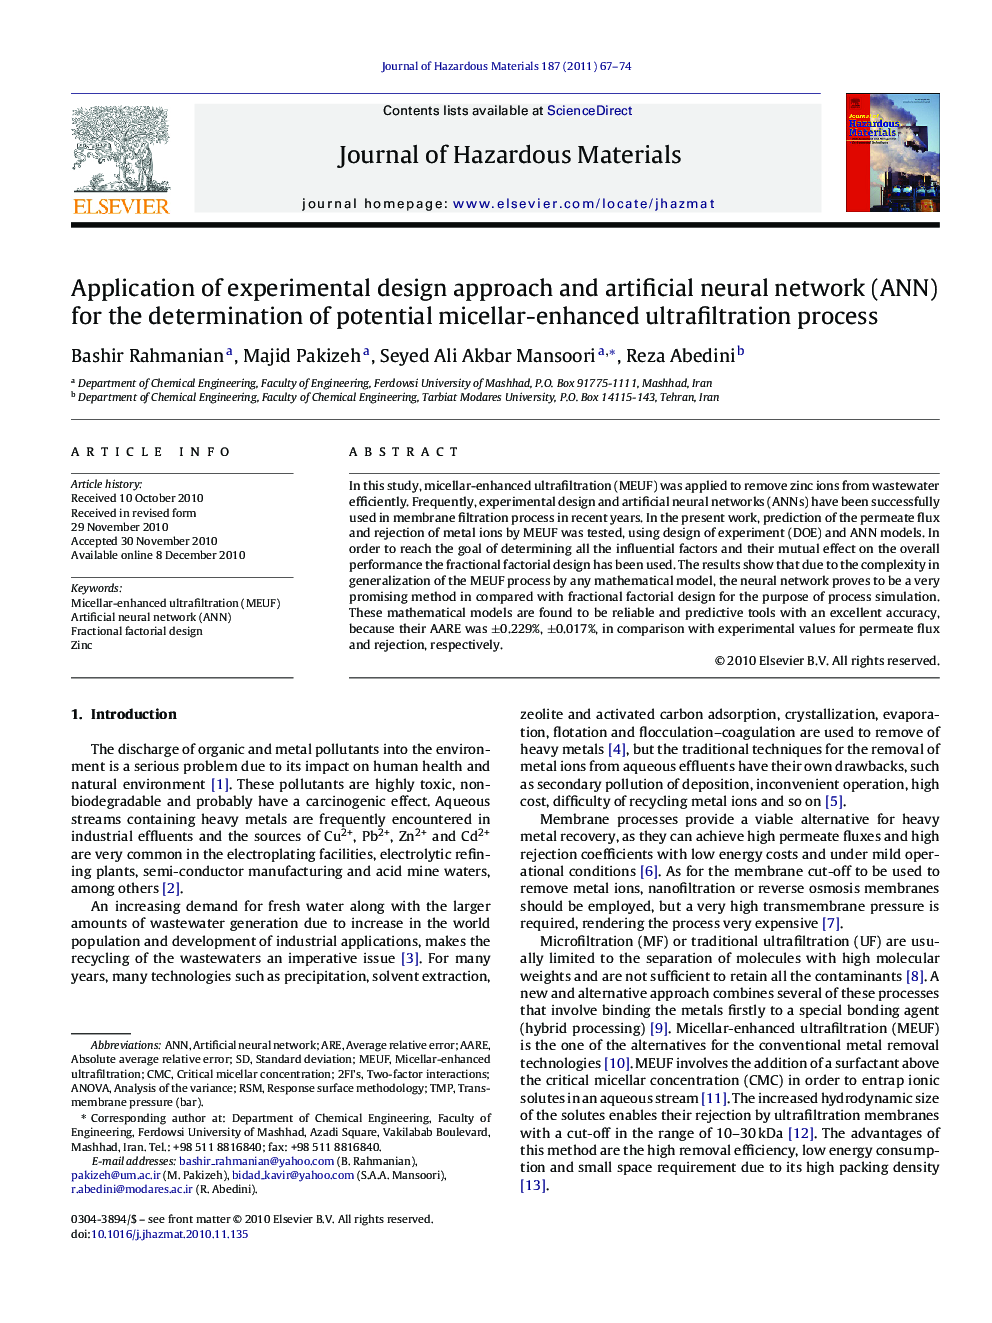 Application of experimental design approach and artificial neural network (ANN) for the determination of potential micellar-enhanced ultrafiltration process